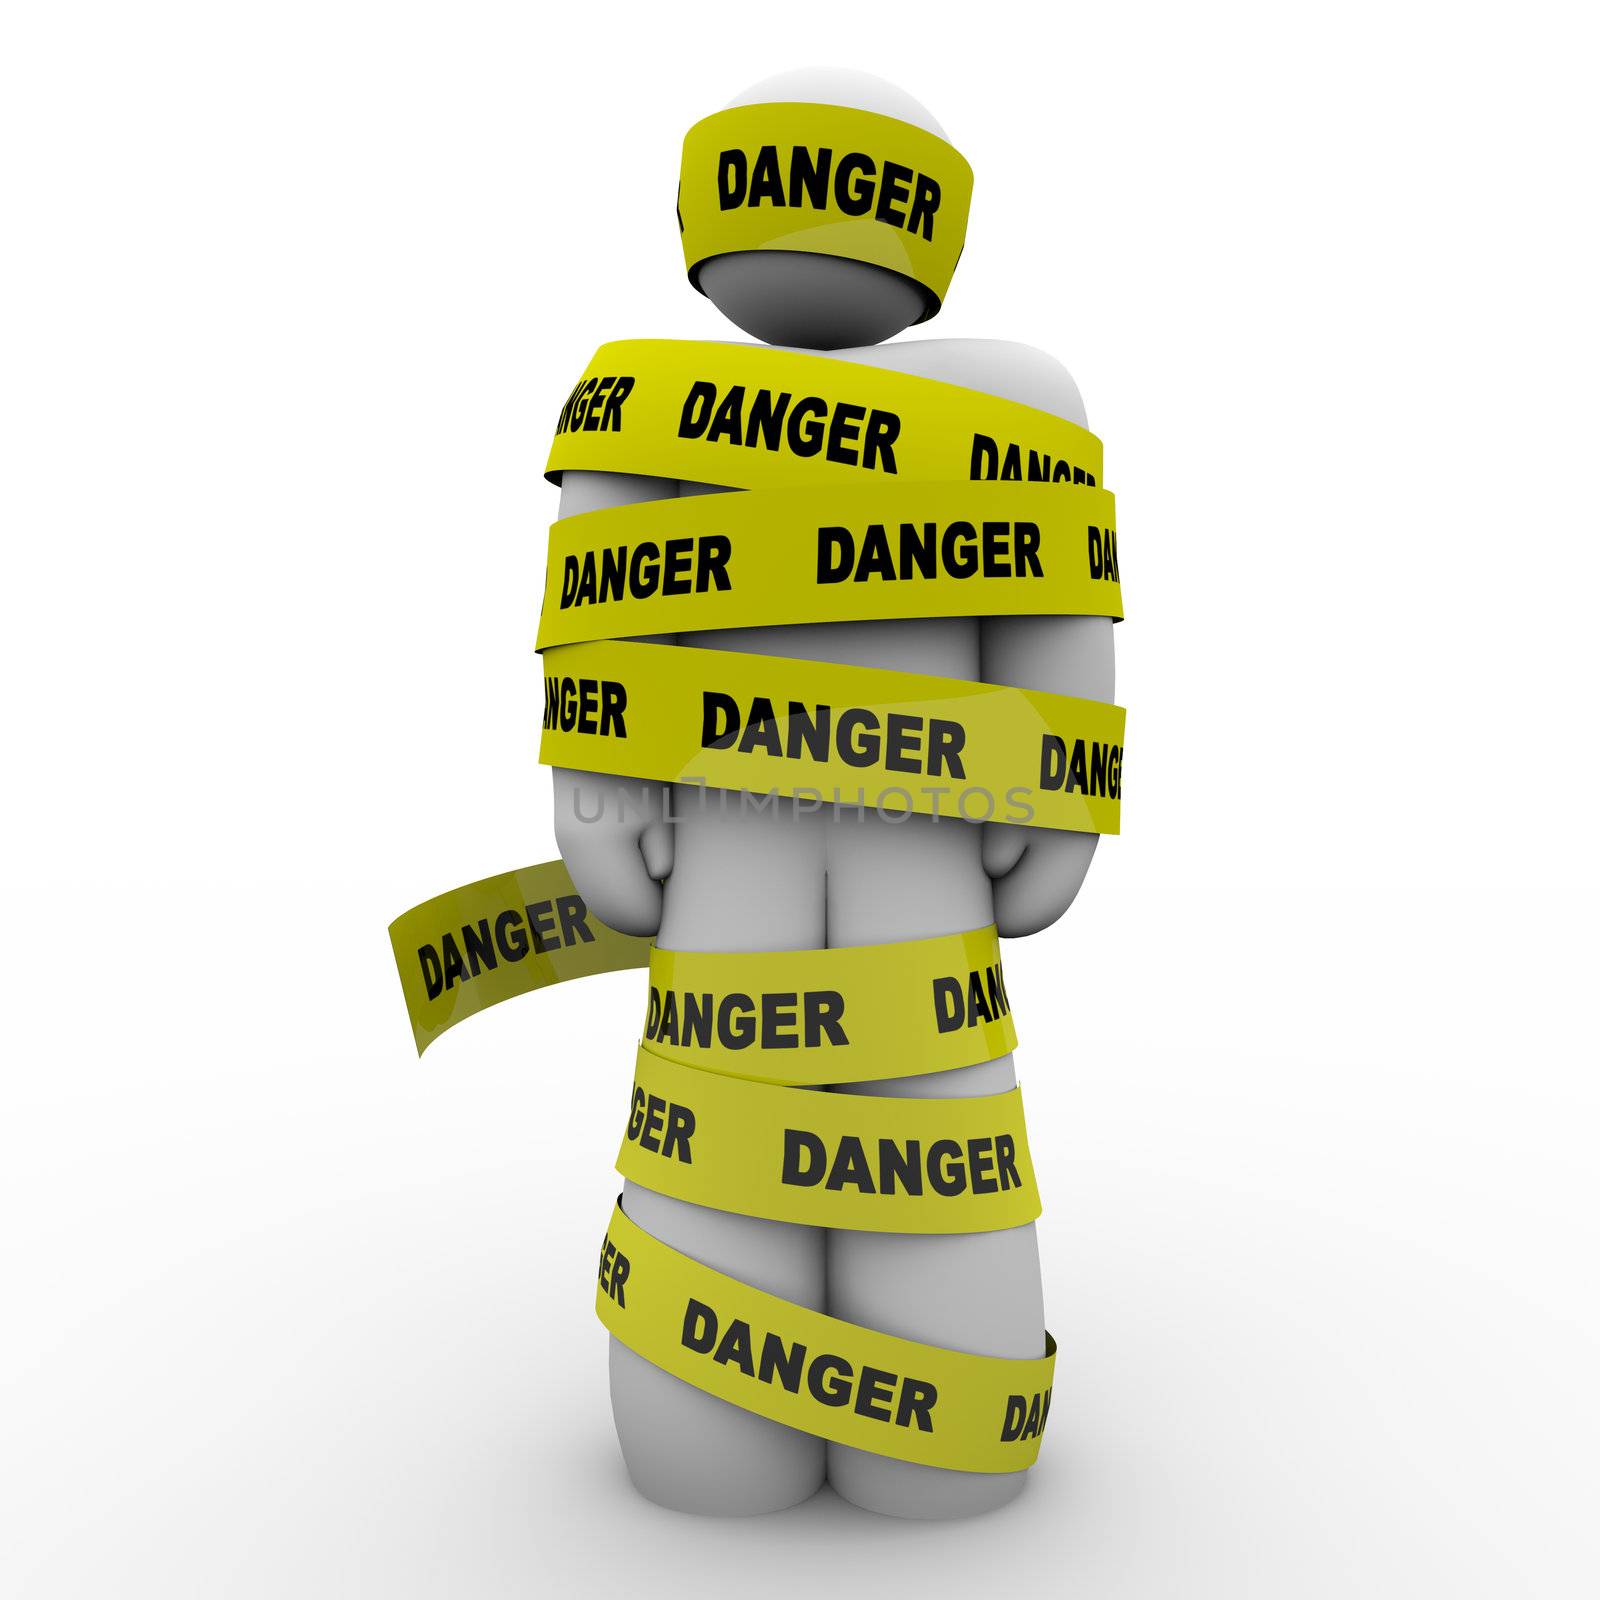 A person or man wrapped in yellow tape marked Danger, illustrating a warning, caution, hazard, crisis or emergency